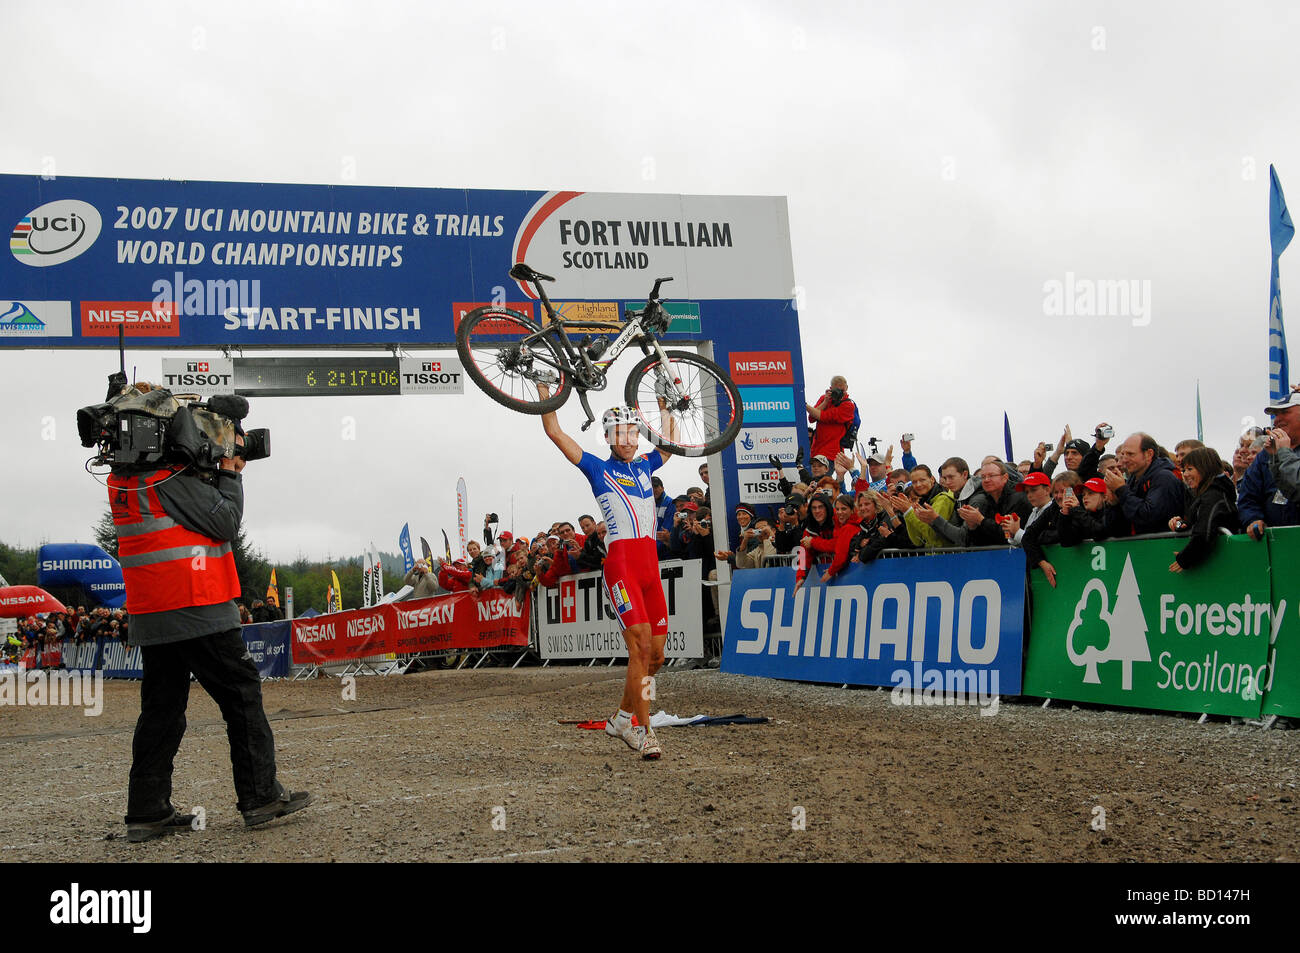 Julien Absalon of France celebrates winning the Cross Country Mountain Bike World Championships in Fort William, Scotland. Stock Photo